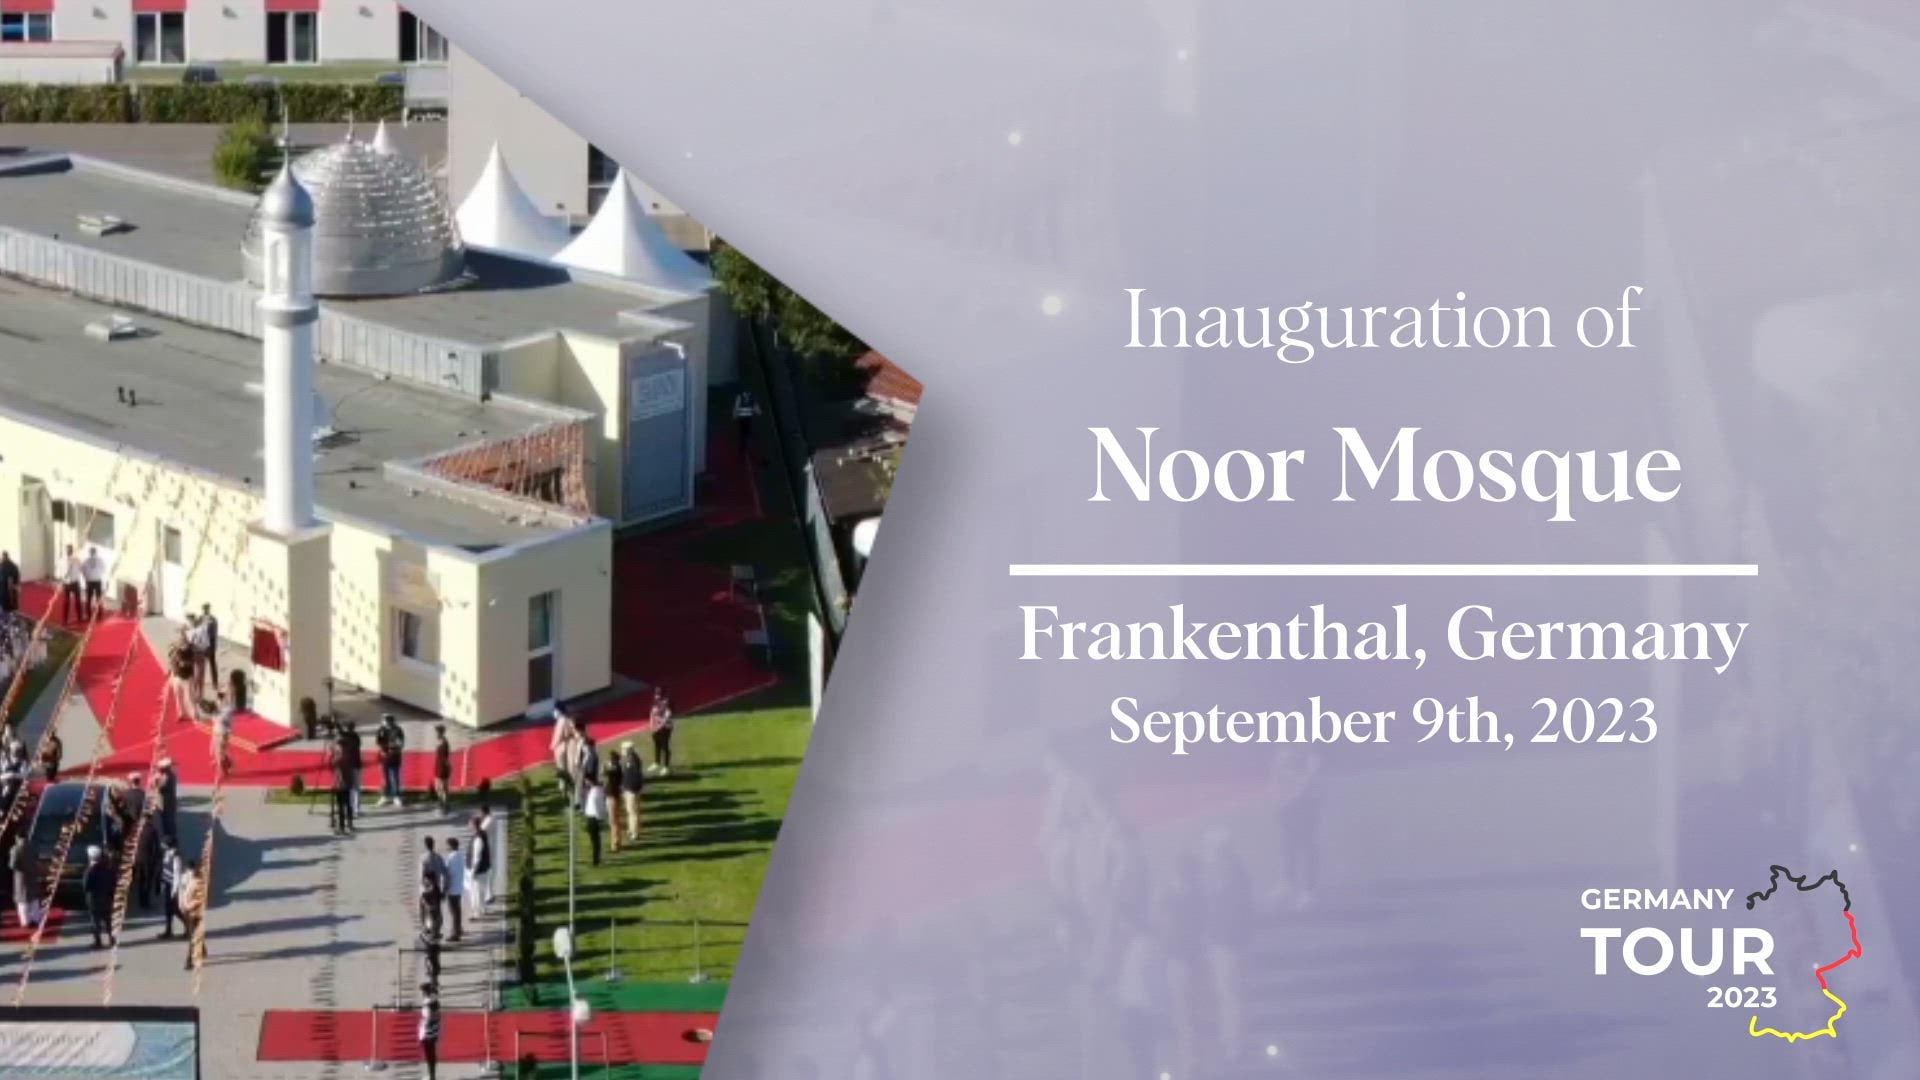 Mosque Inauguration